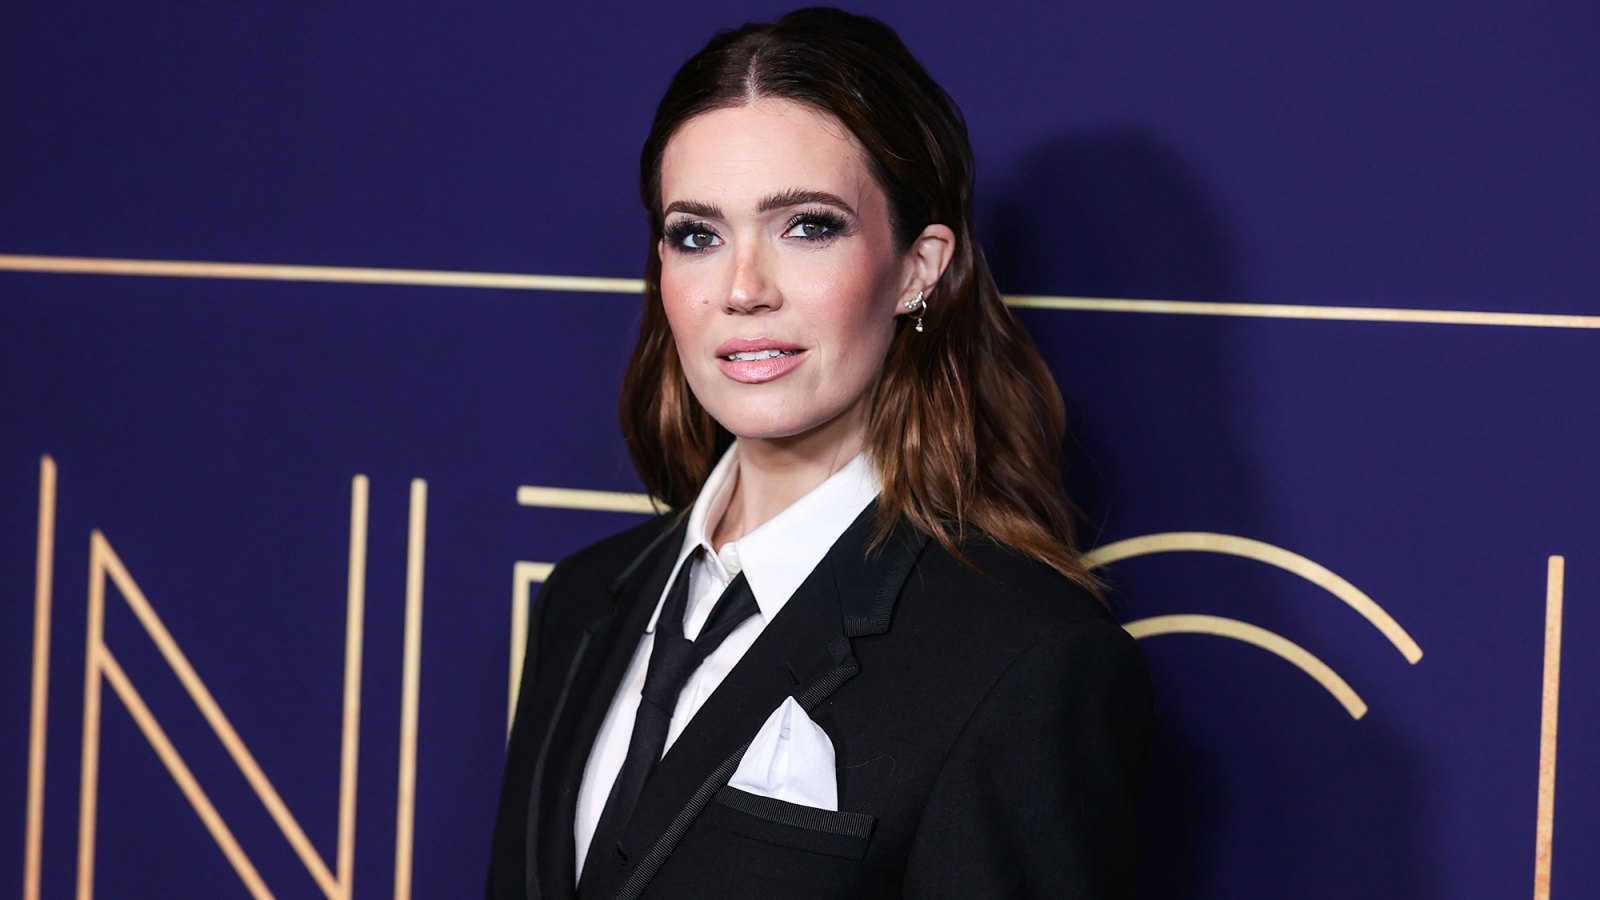 Mandy Moore Reflects on ‘Lean Years’ in Hollywood, Explains How She Survived on Residual Paychecks